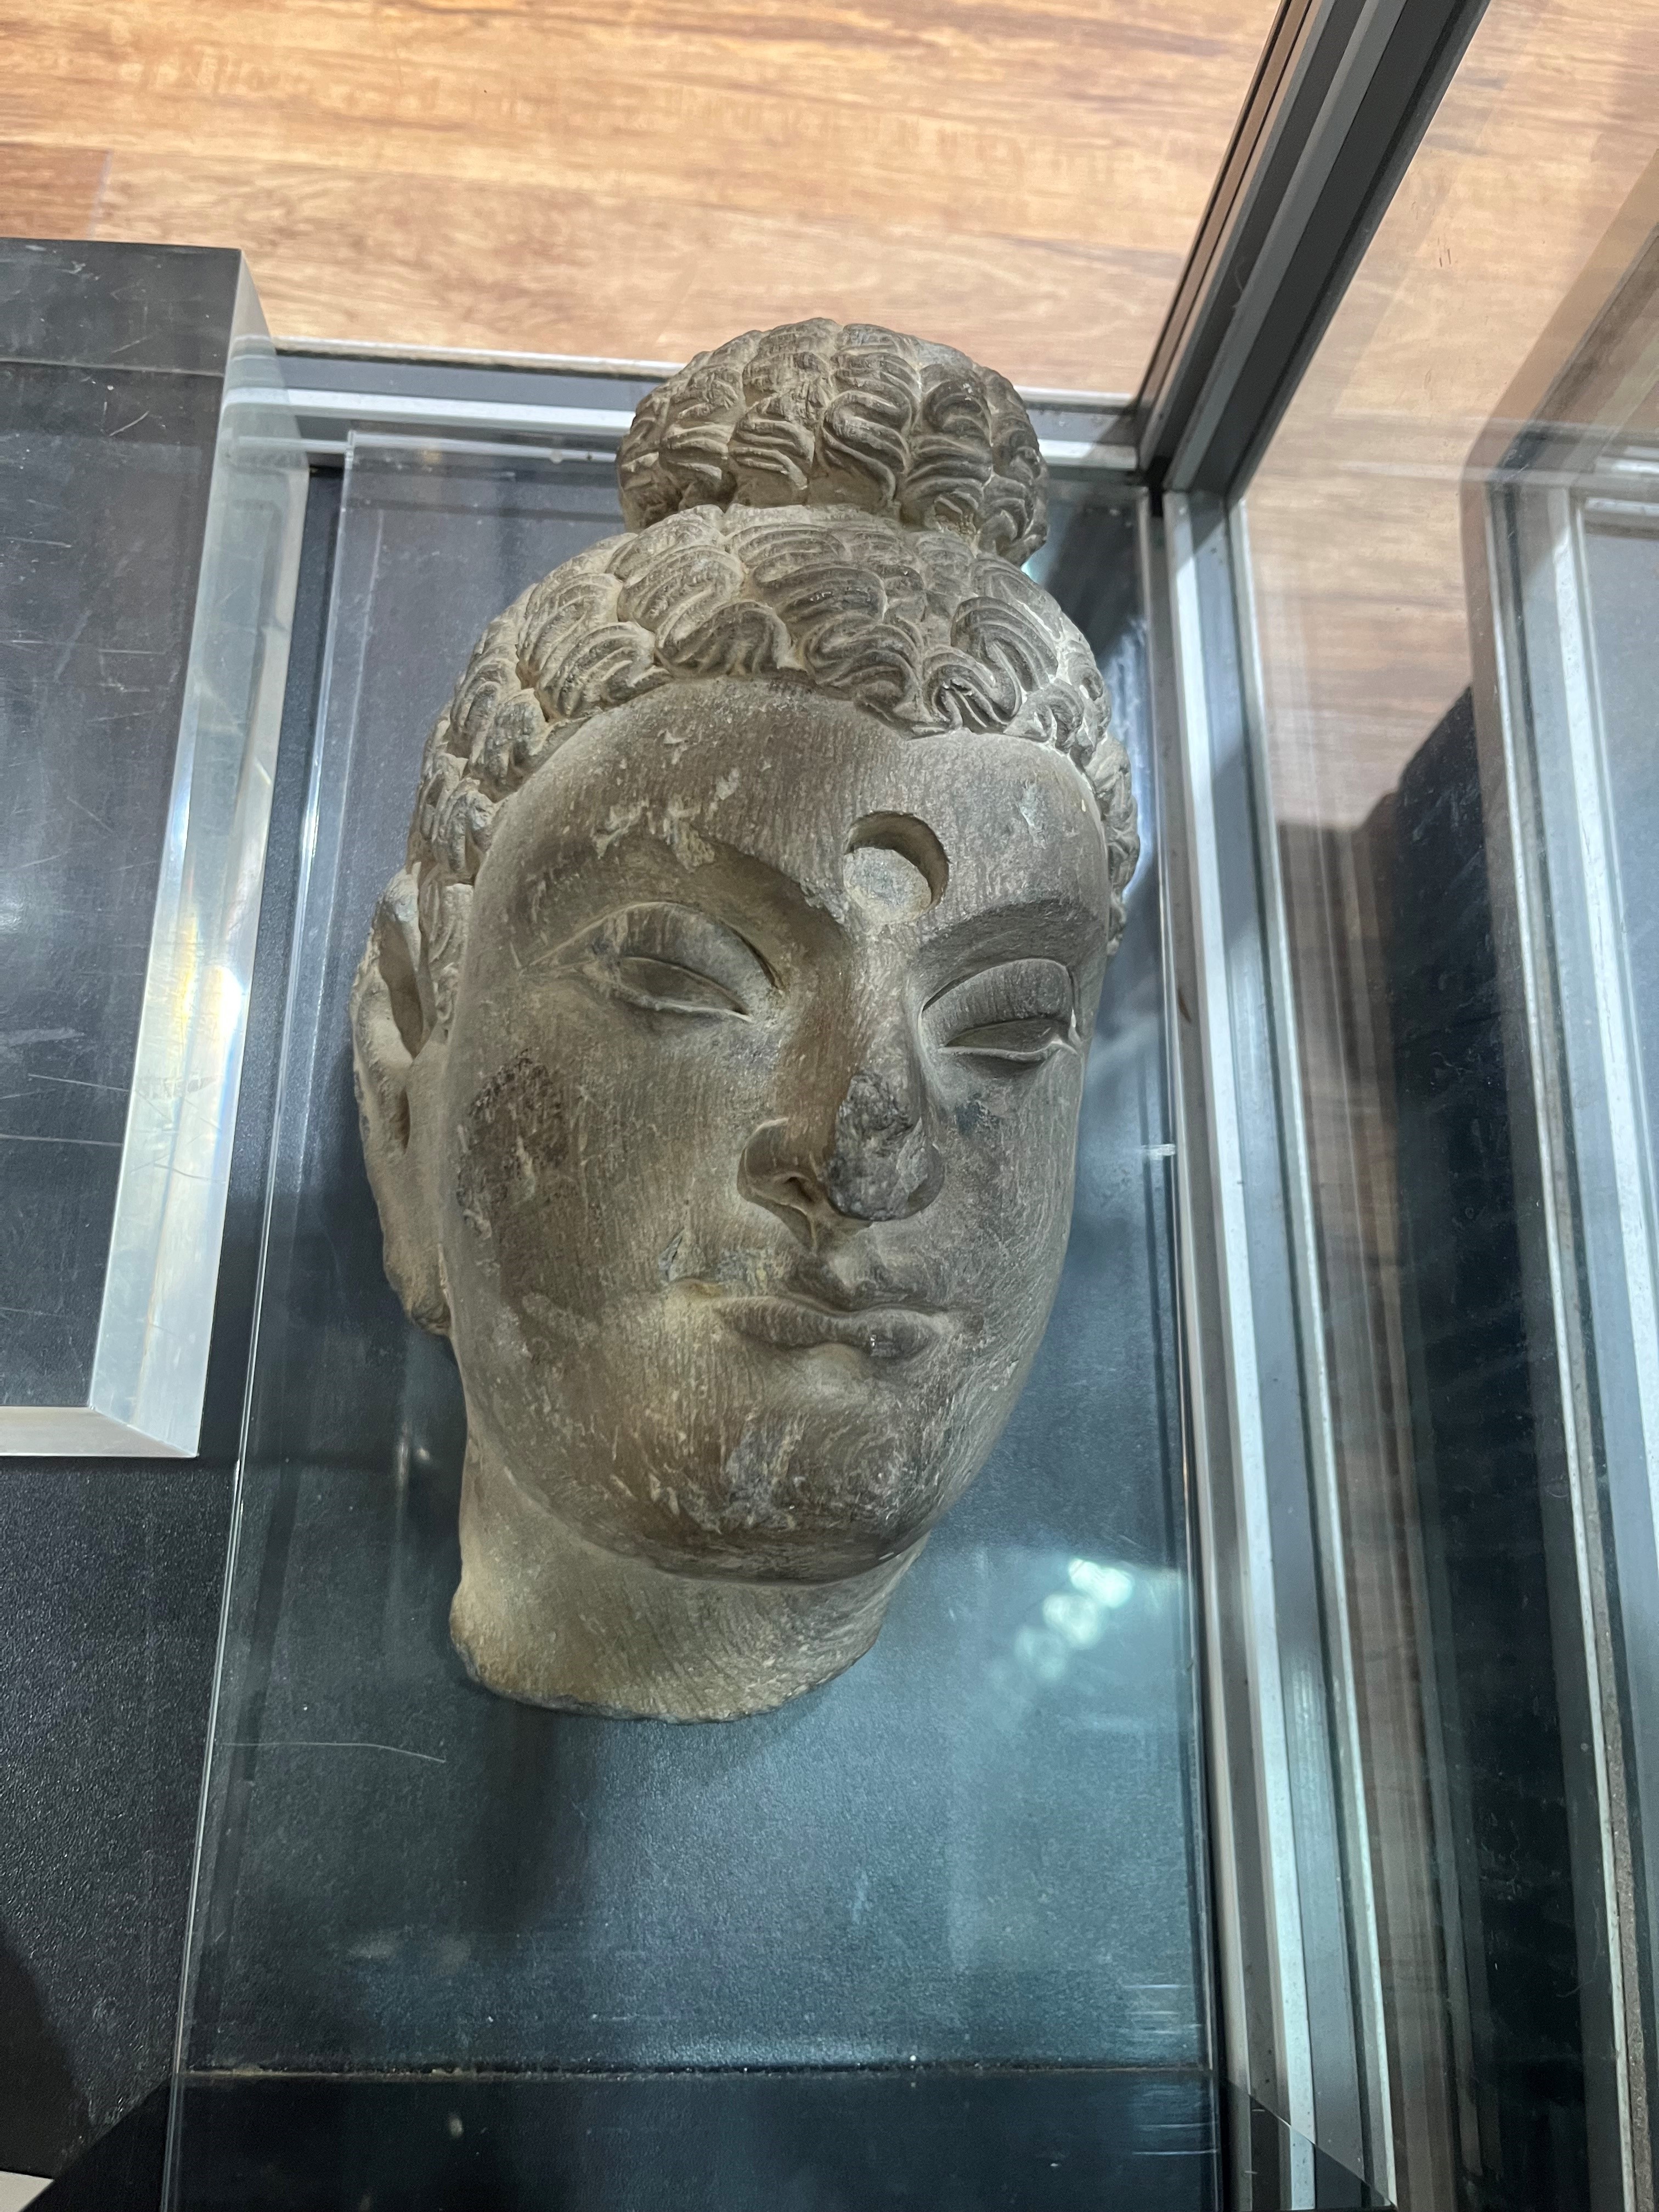 Fragmentary grey carved schist head of Buddha Indian, ancient region of Gandhara, 3rd-4th Century - Image 8 of 9